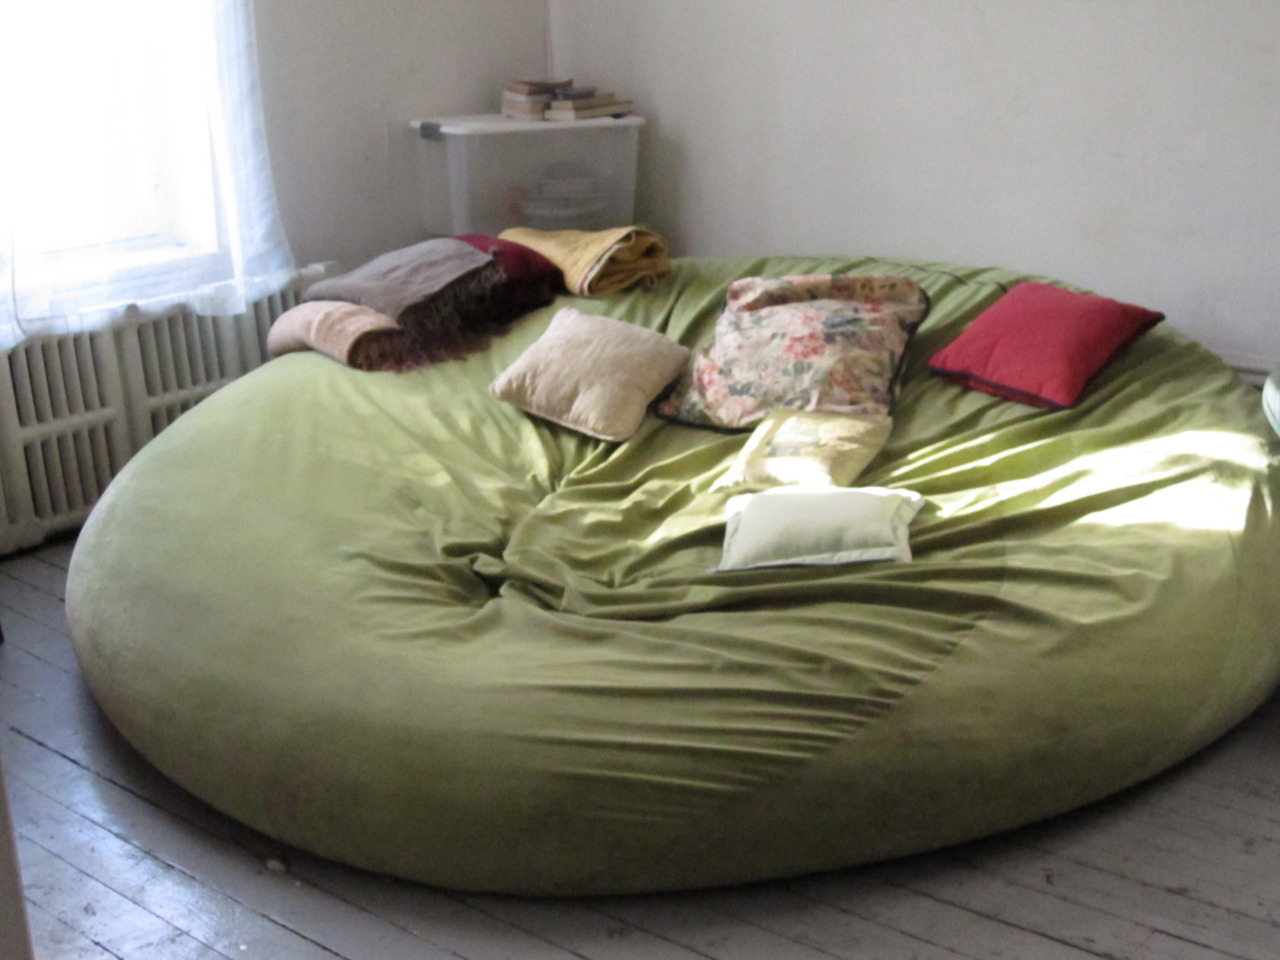 21/05/2015·21/05/2015·Video embedded· http://goo.gl/BtnX3821/05/2015·21/05/2015·Video embedded· http://goo.gl/BtnX38bean bag bed with blanket and pillow bean bag bed http://goo.gl/BtnX3821/05/2015·21/05/2015·Video embedded· http://goo.gl/BtnX3821/05/2015·21/05/2015·Video embedded· http://goo.gl/BtnX38bean bag bed with blanket and pillow bean bag bed http://goo.gl/BtnX38bean bag bed with blanket and pillow bean bag bed...